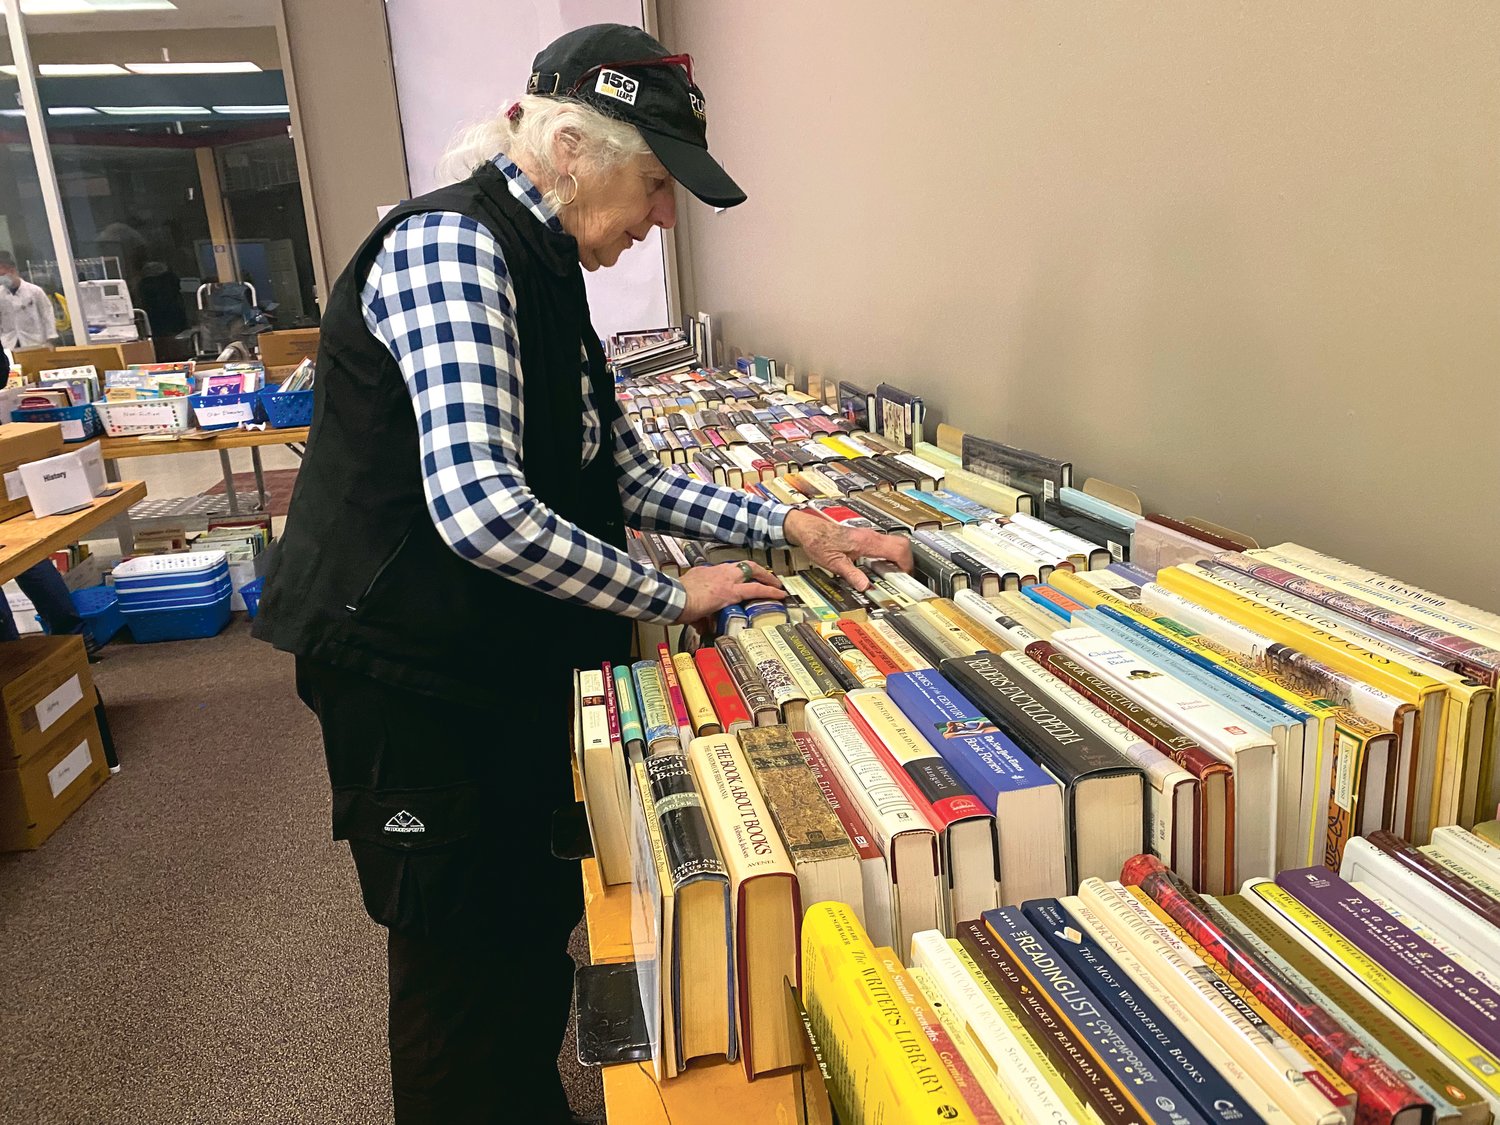 The American Association of University Women Lewis County chapter’s annual book sale returns to the Lewis County Mall March 23 and runs through March 26.